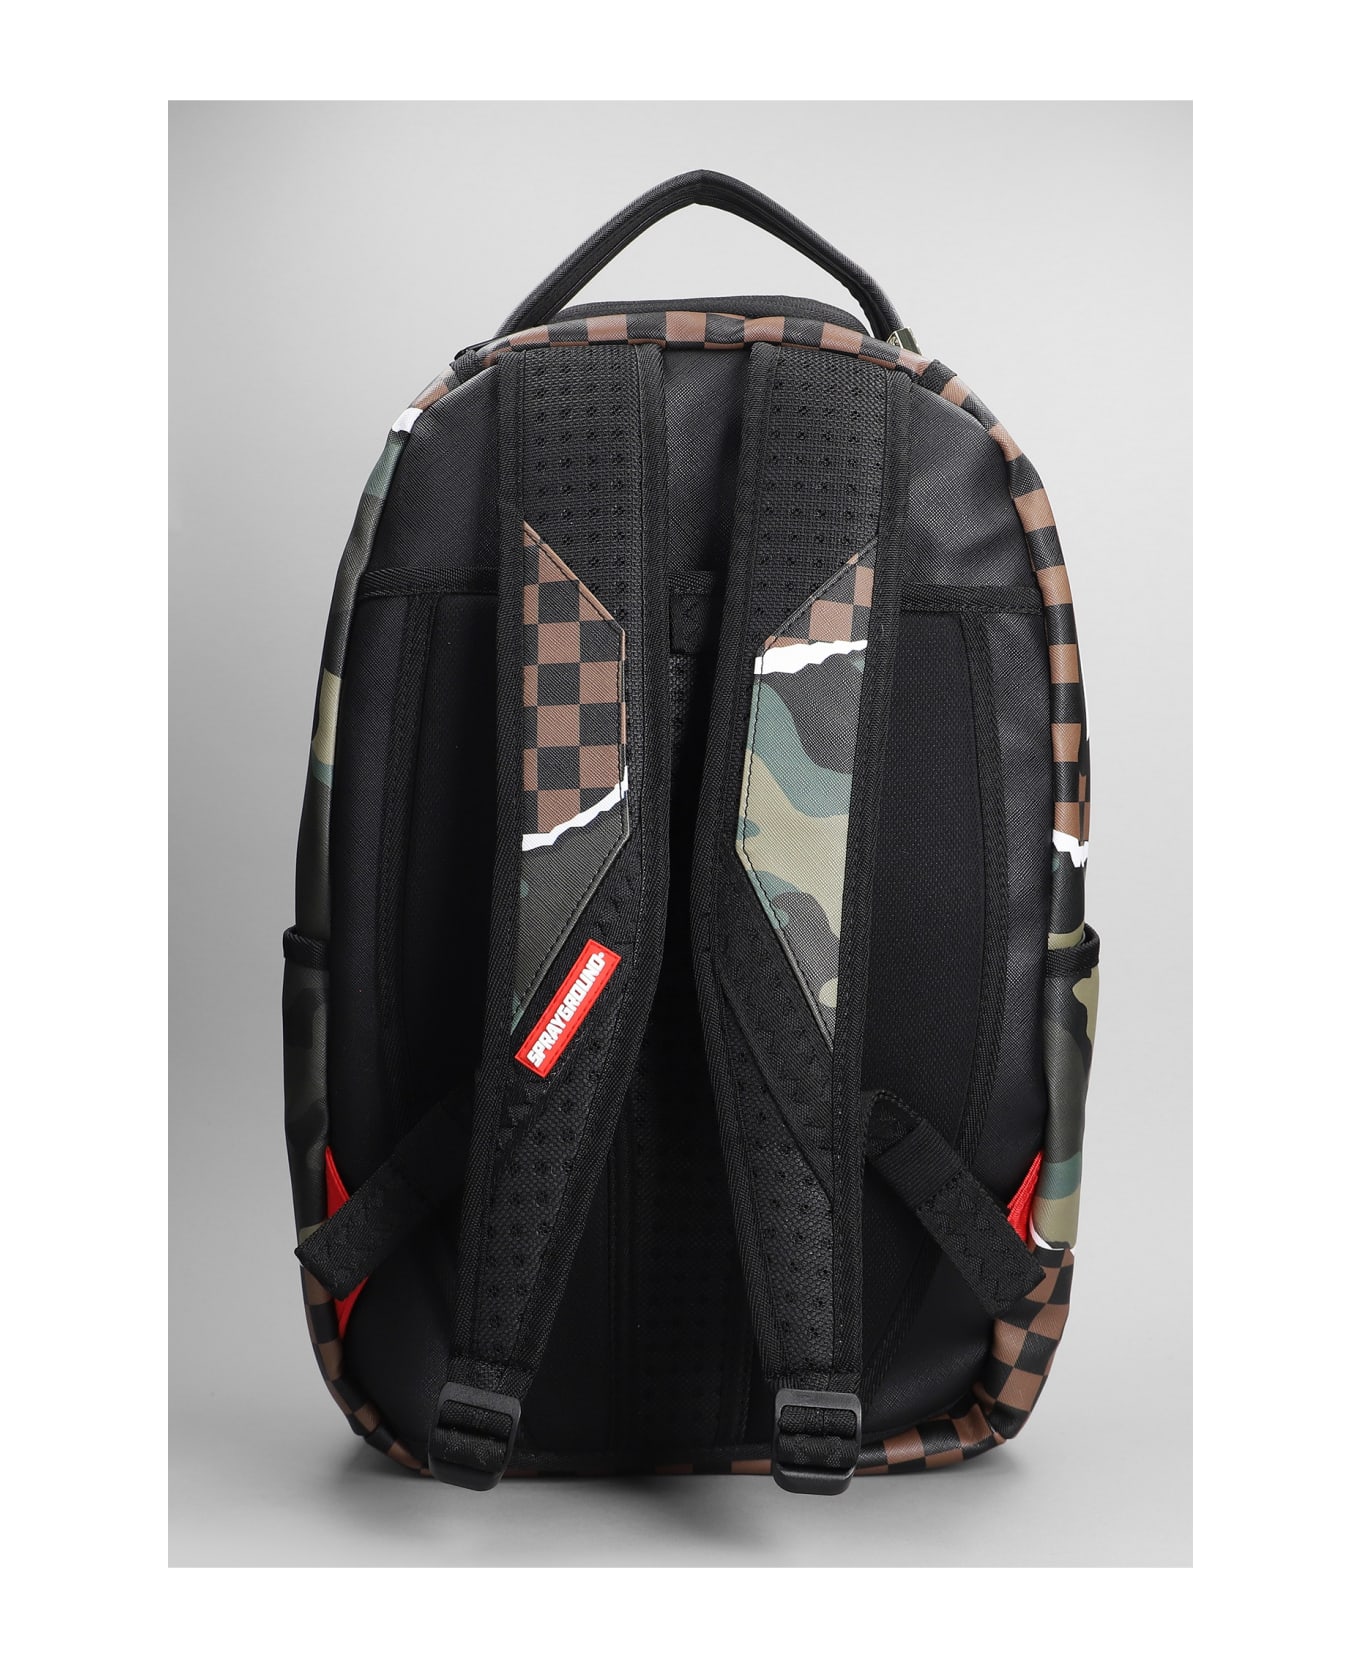 Sprayground Backpack In Brown Pvc - Multicolor